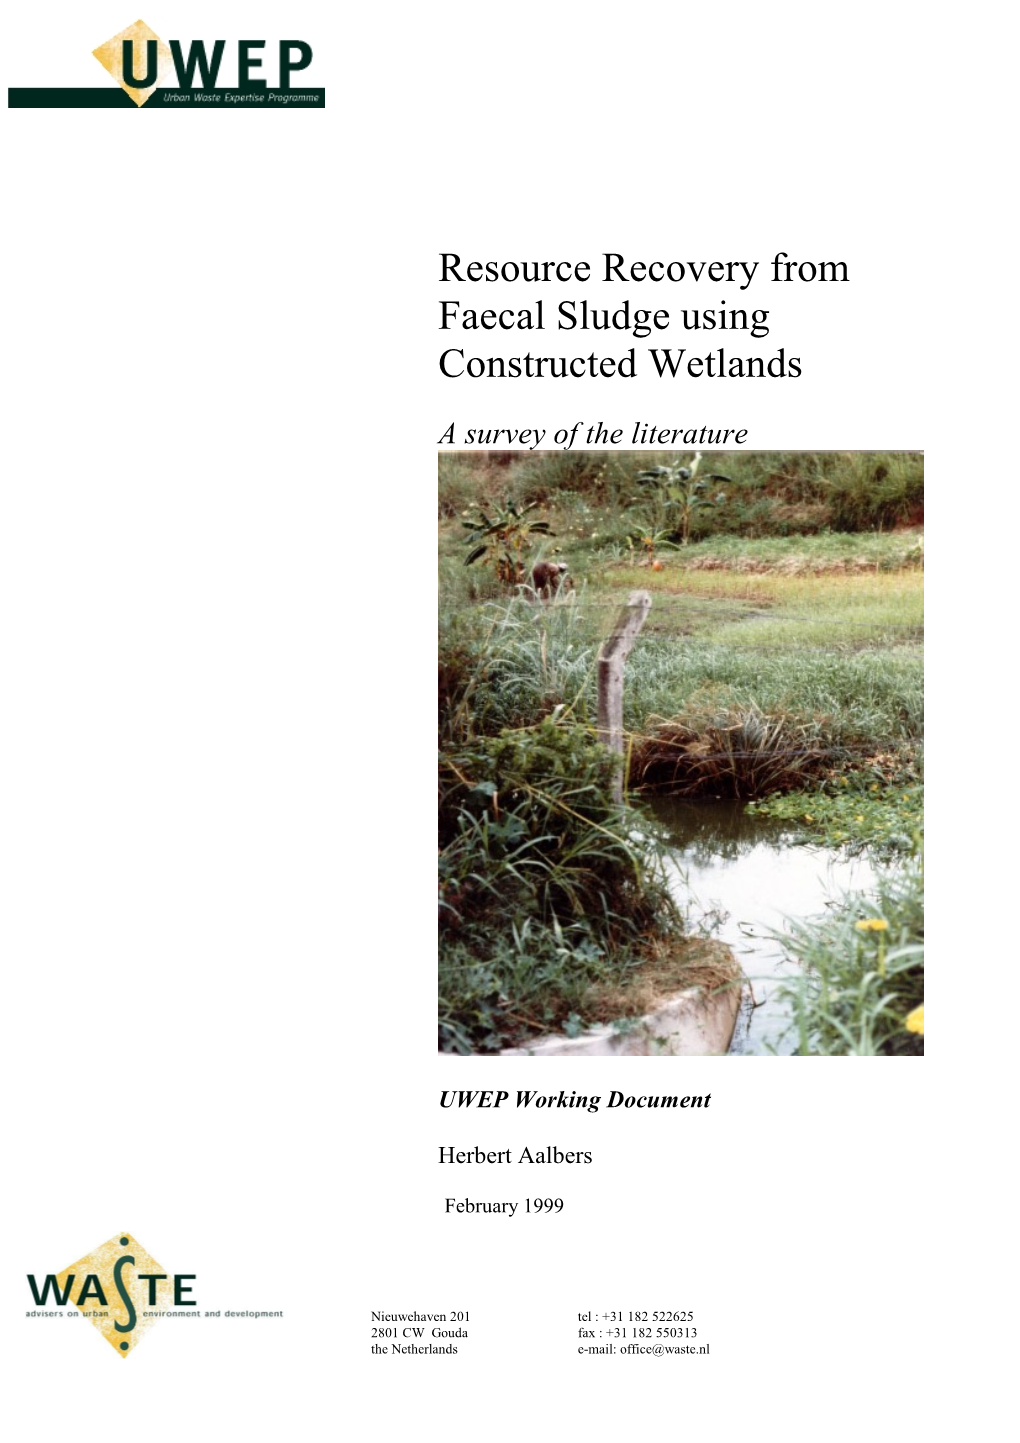 Resource Recovery from Faecal Sludge Using Constructed Wetlands